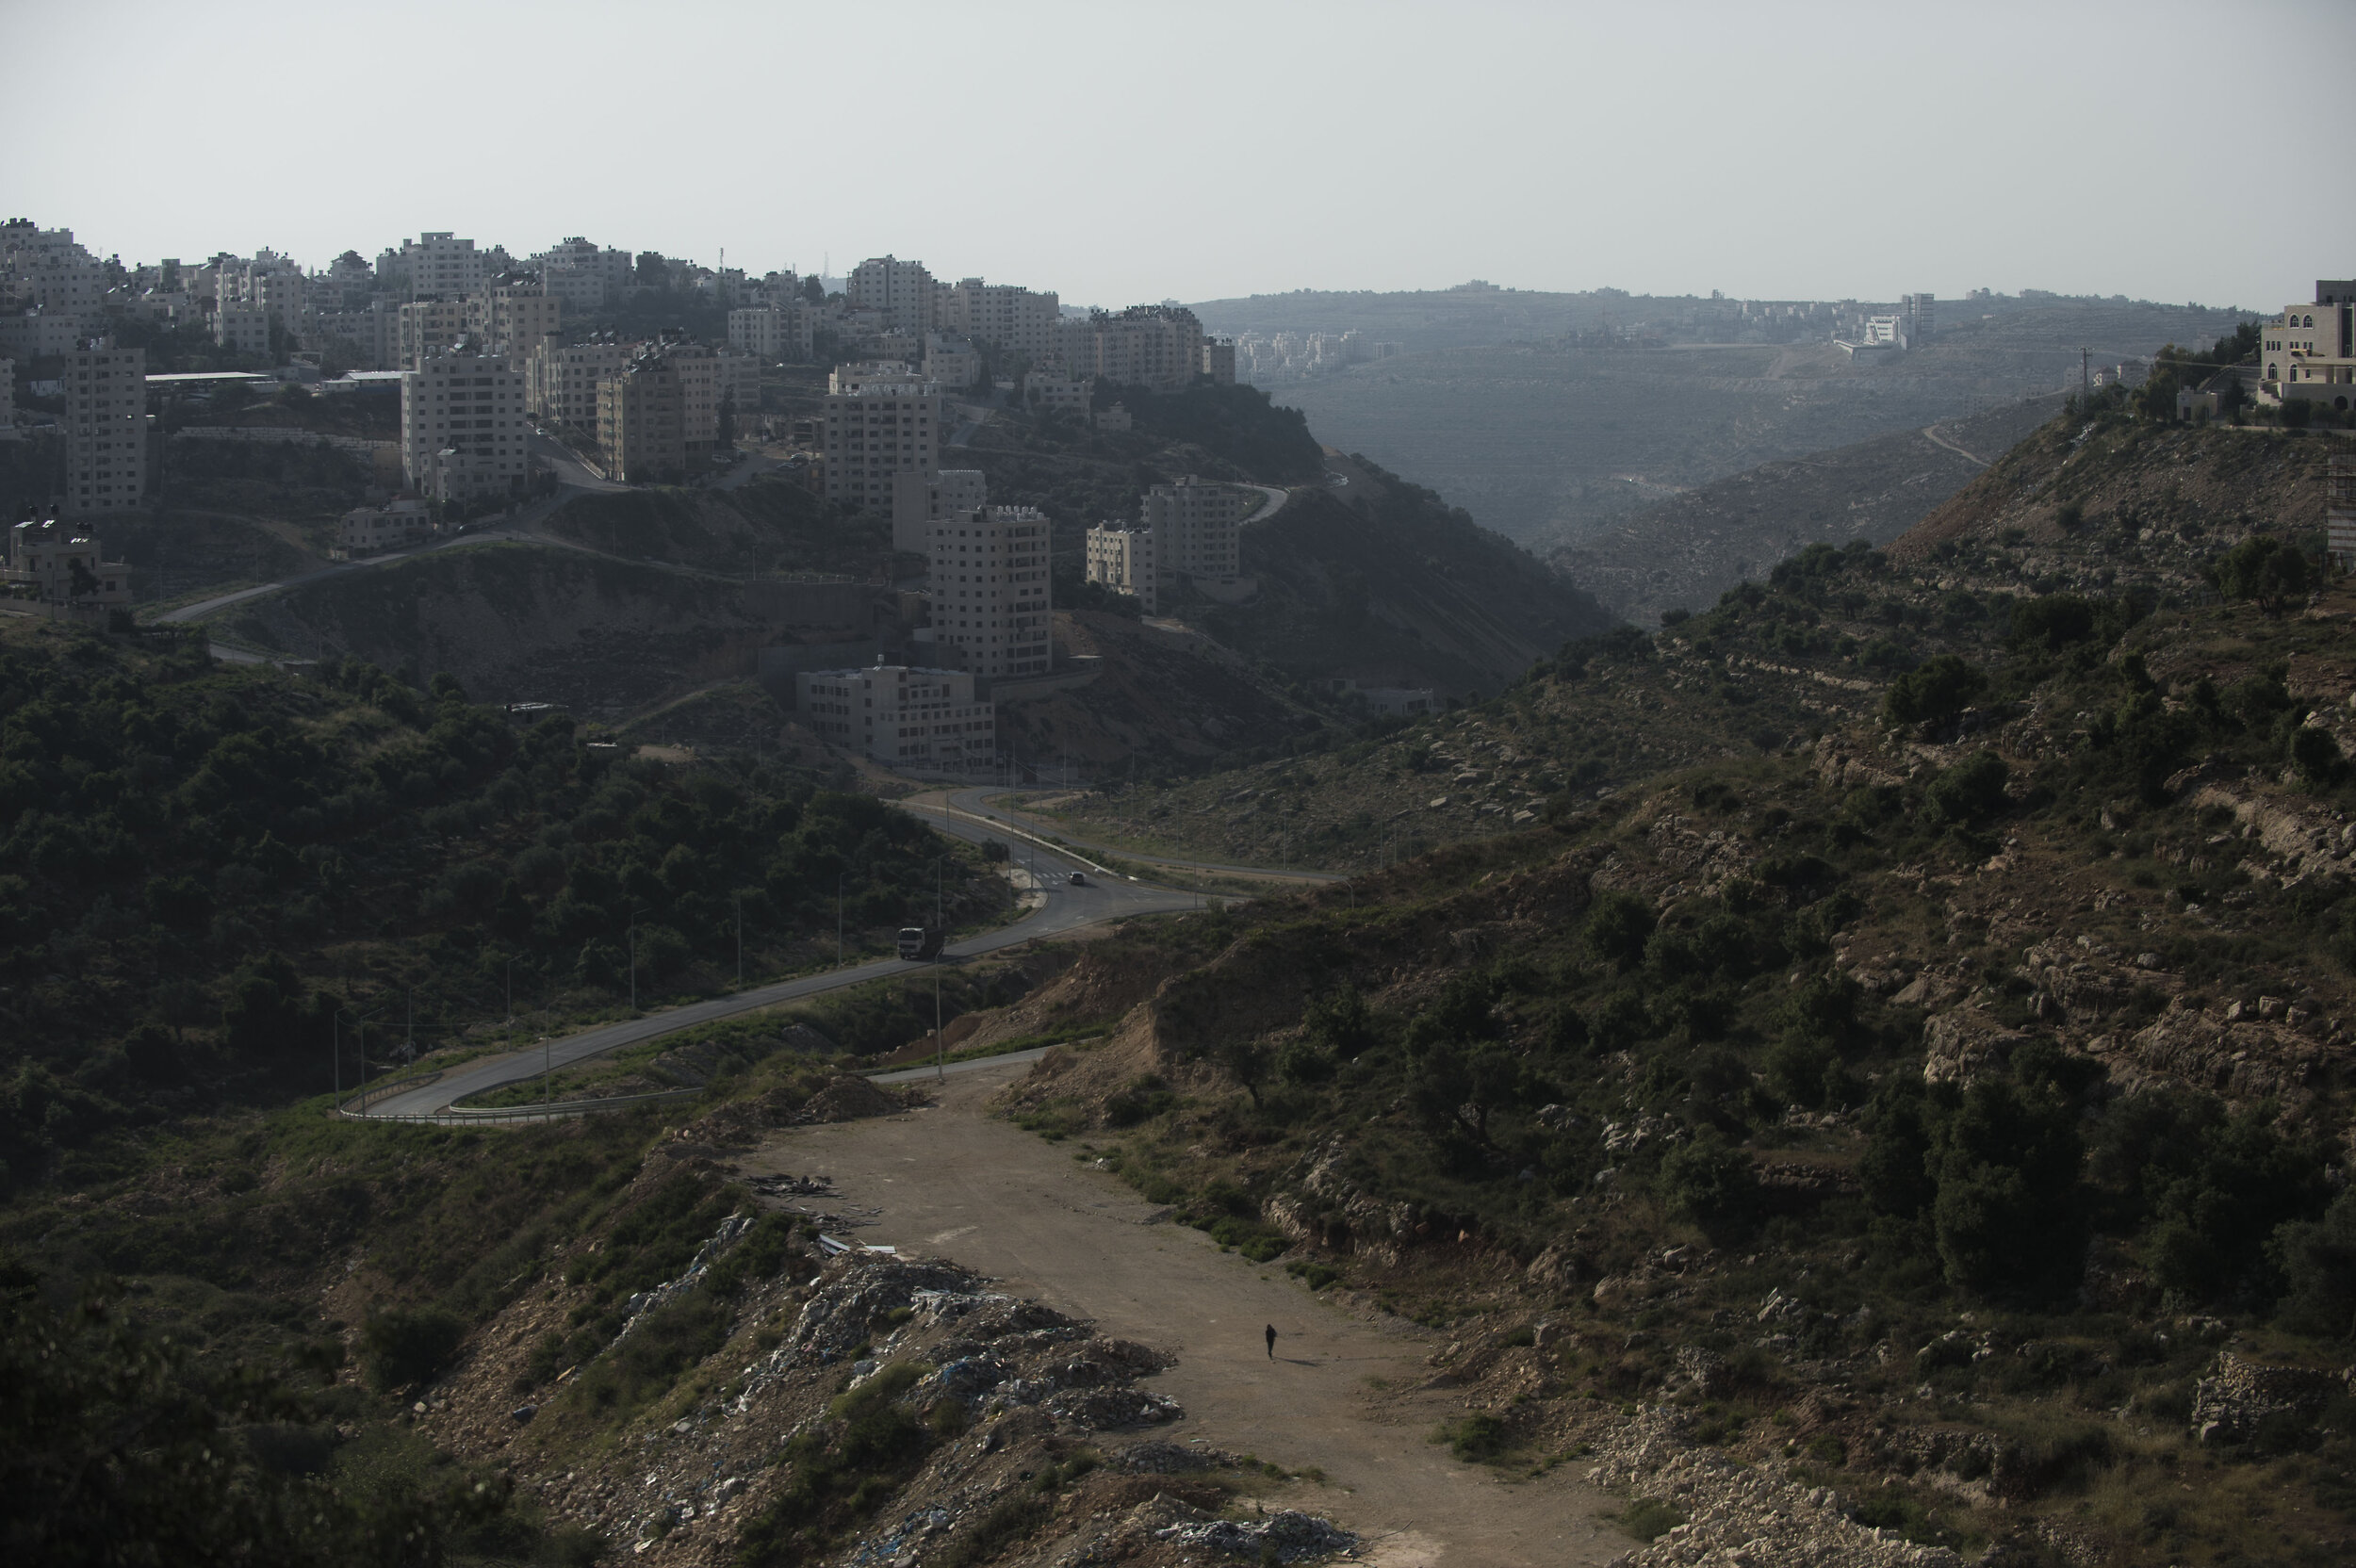  A man walks through the valley that cuts in Ramallah, the de facto capital of the Occupied West Bank. 